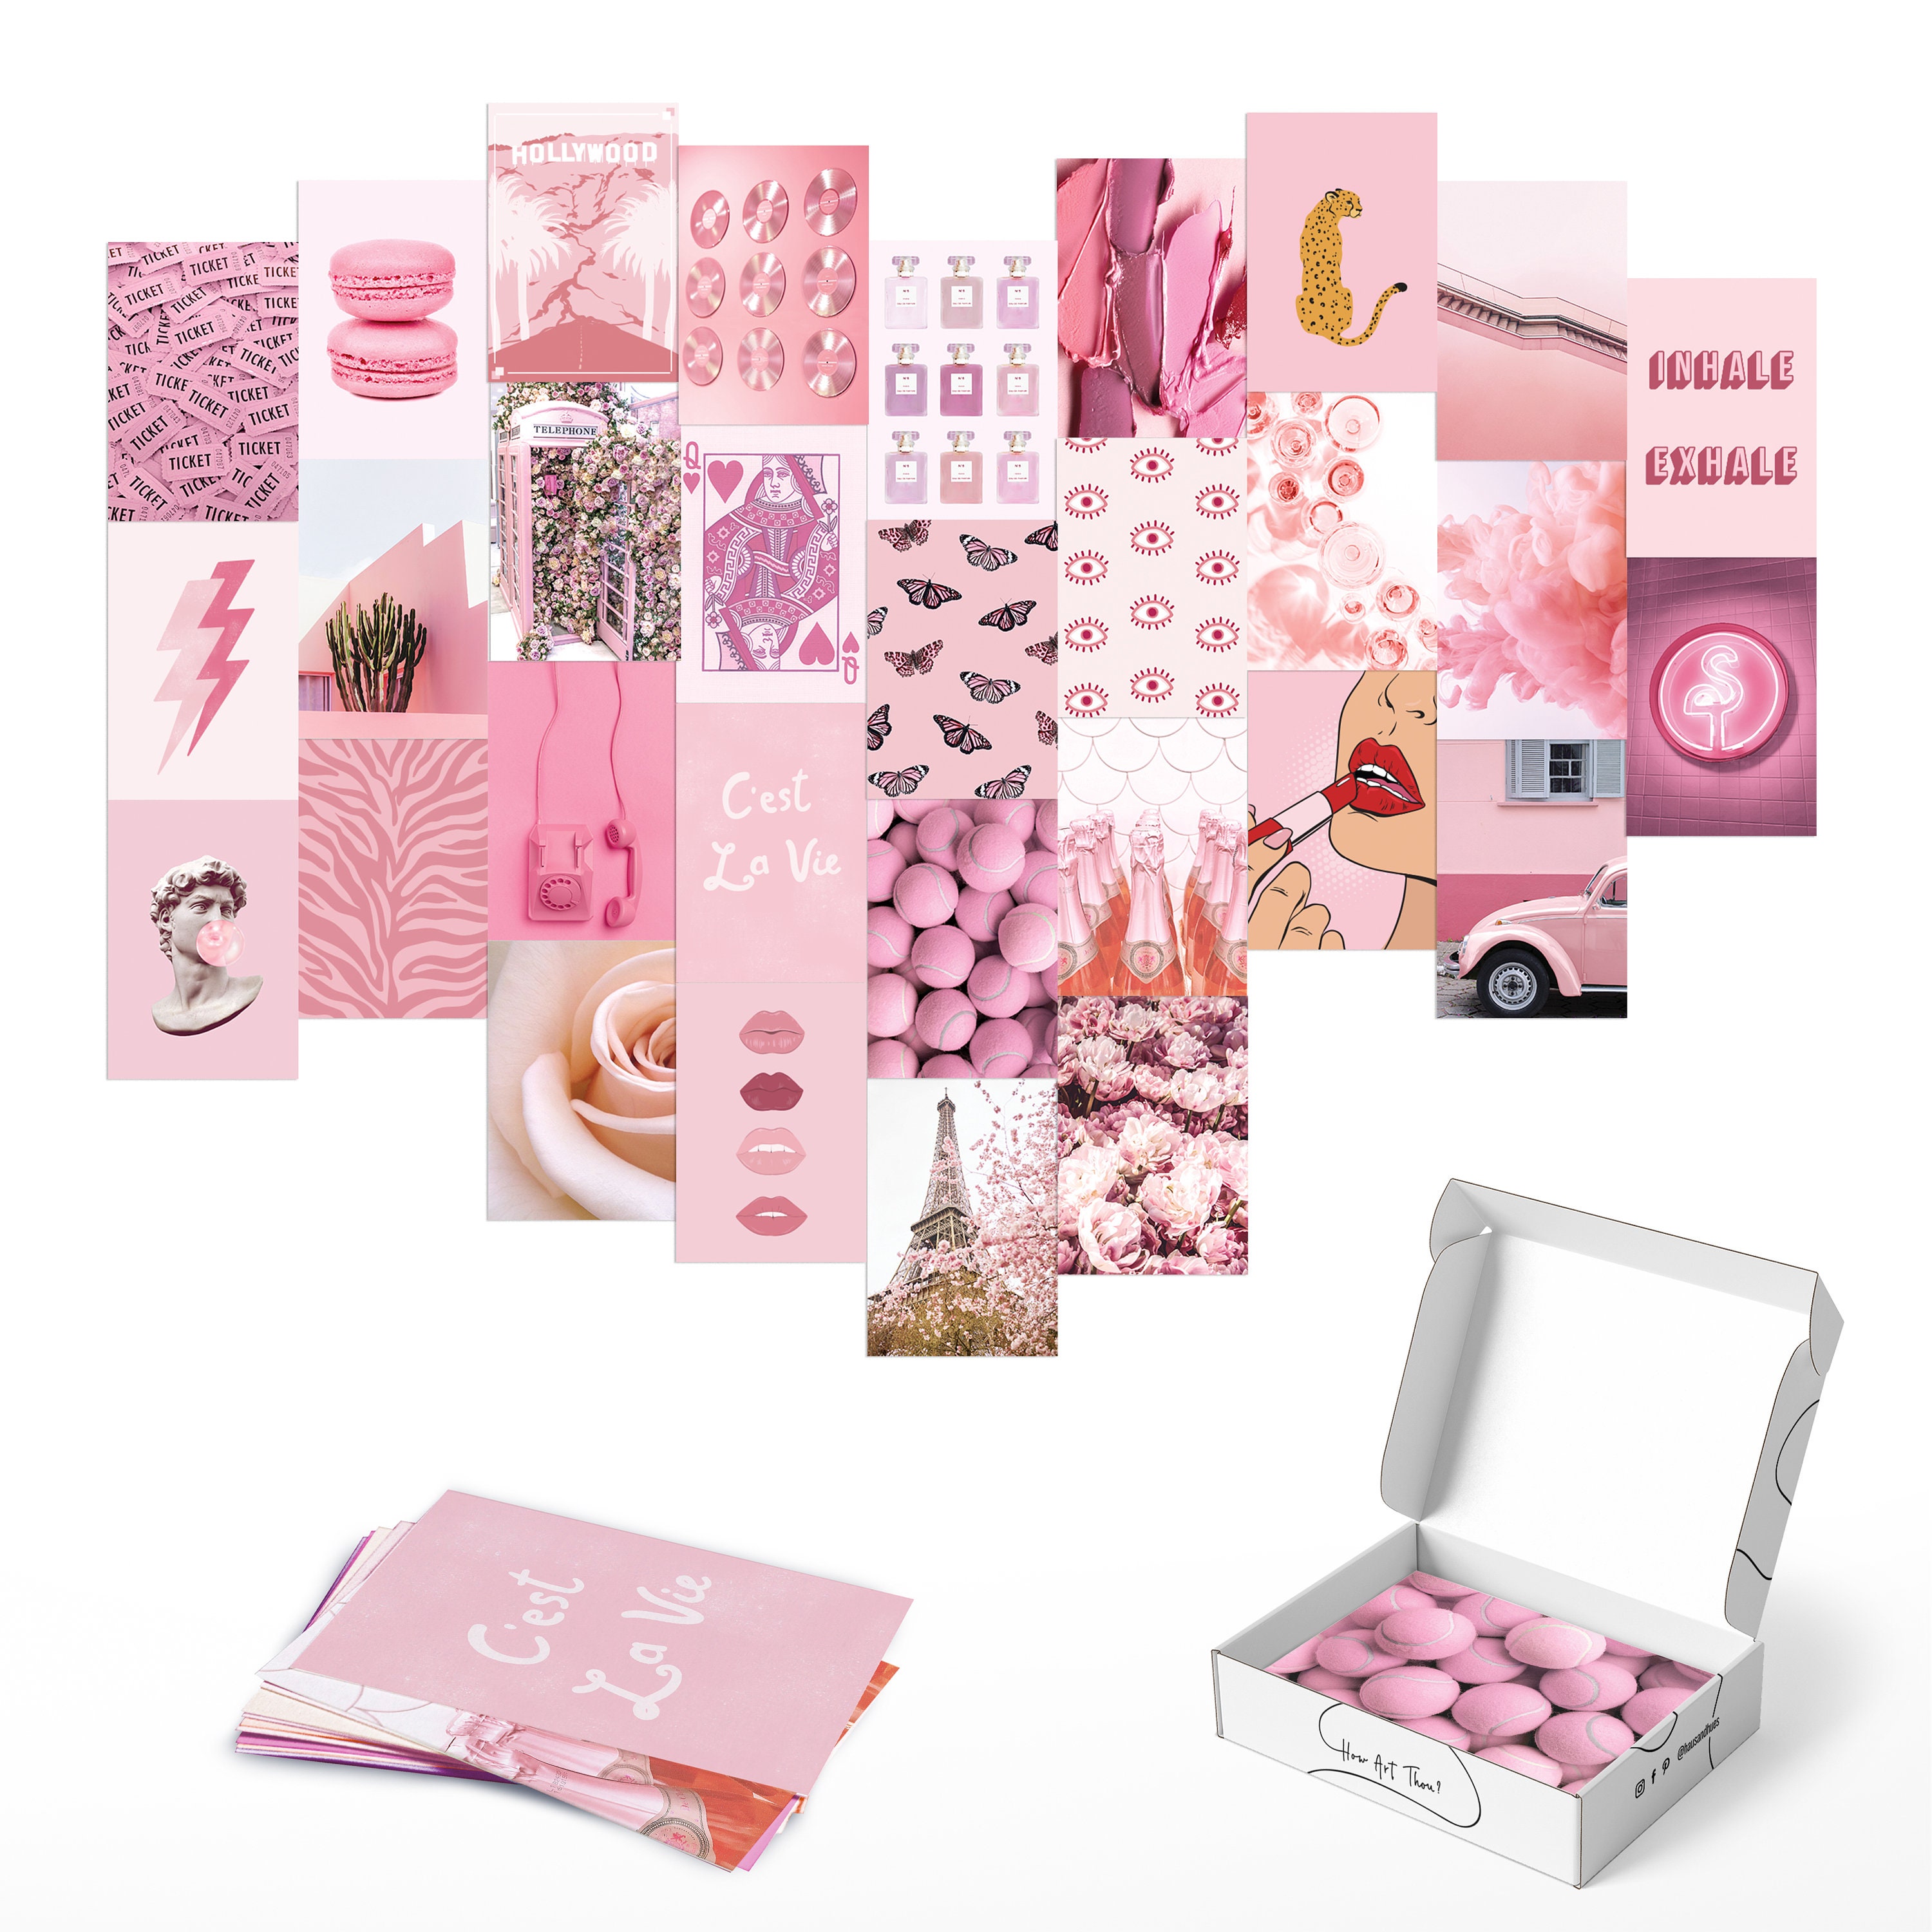 Boujee Pink Aesthetic Wall Collage Kit Pink Wall Collage Etsy | My XXX ...